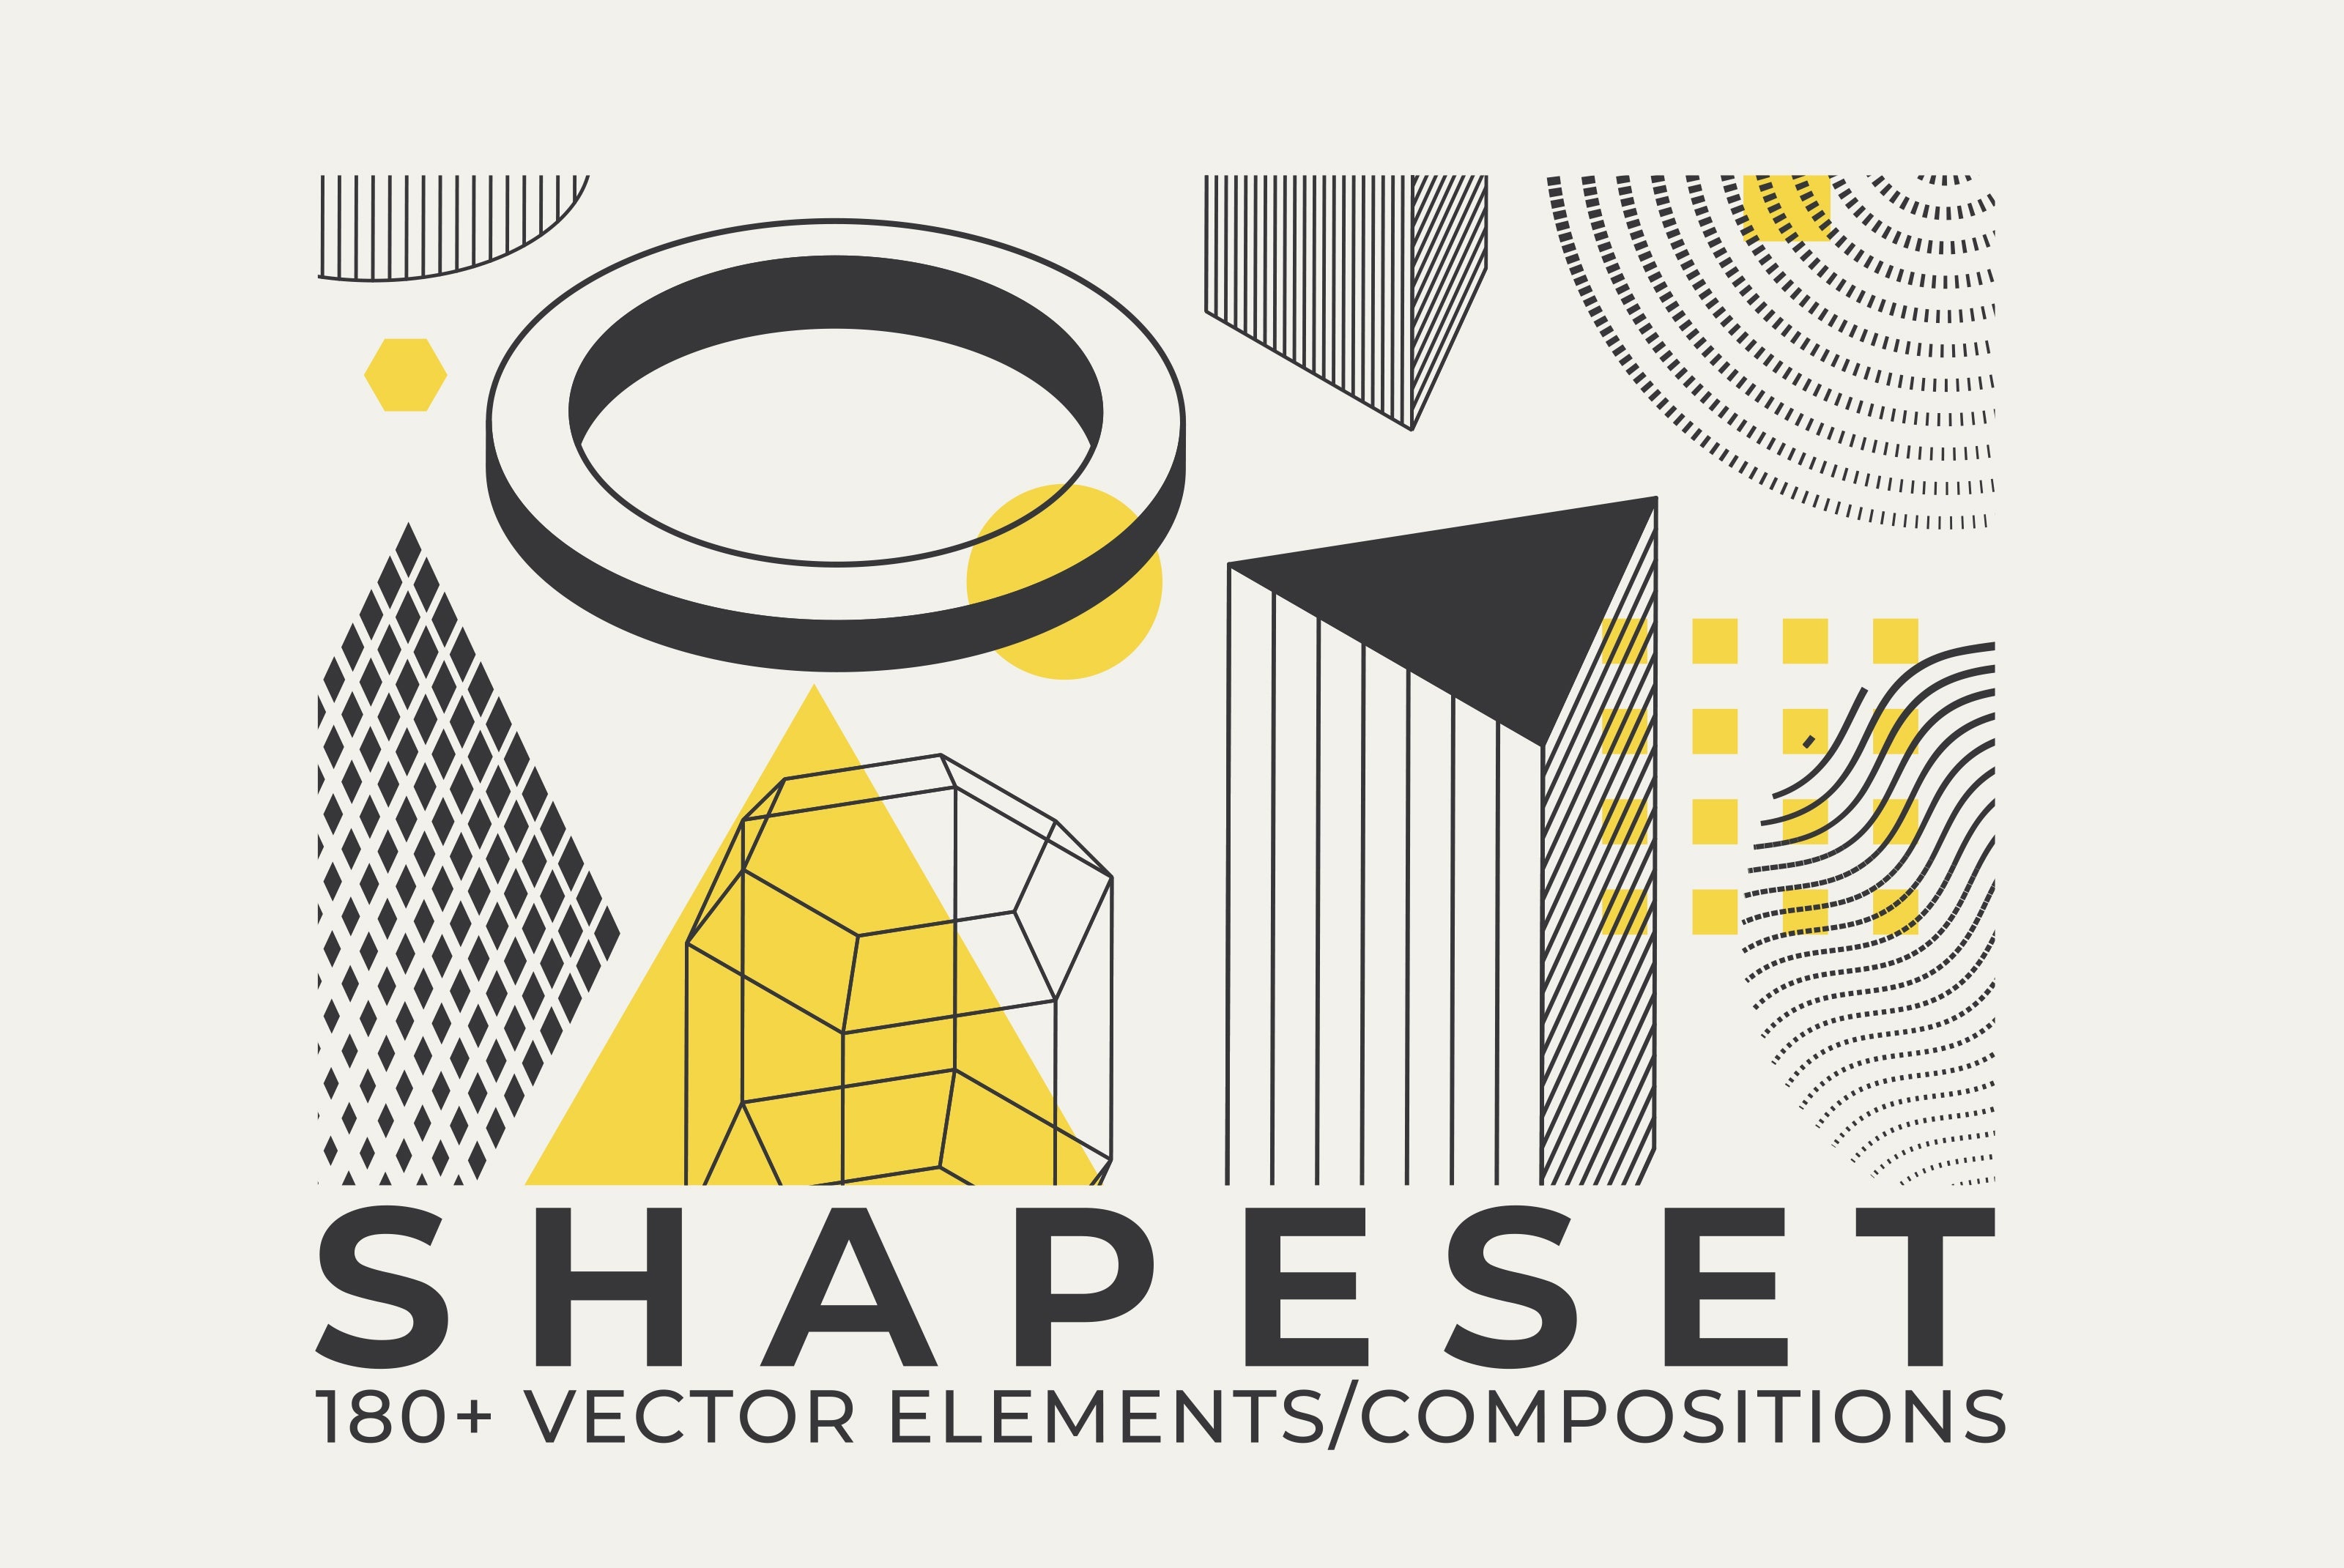 206 Vector Shapes & Posters Set